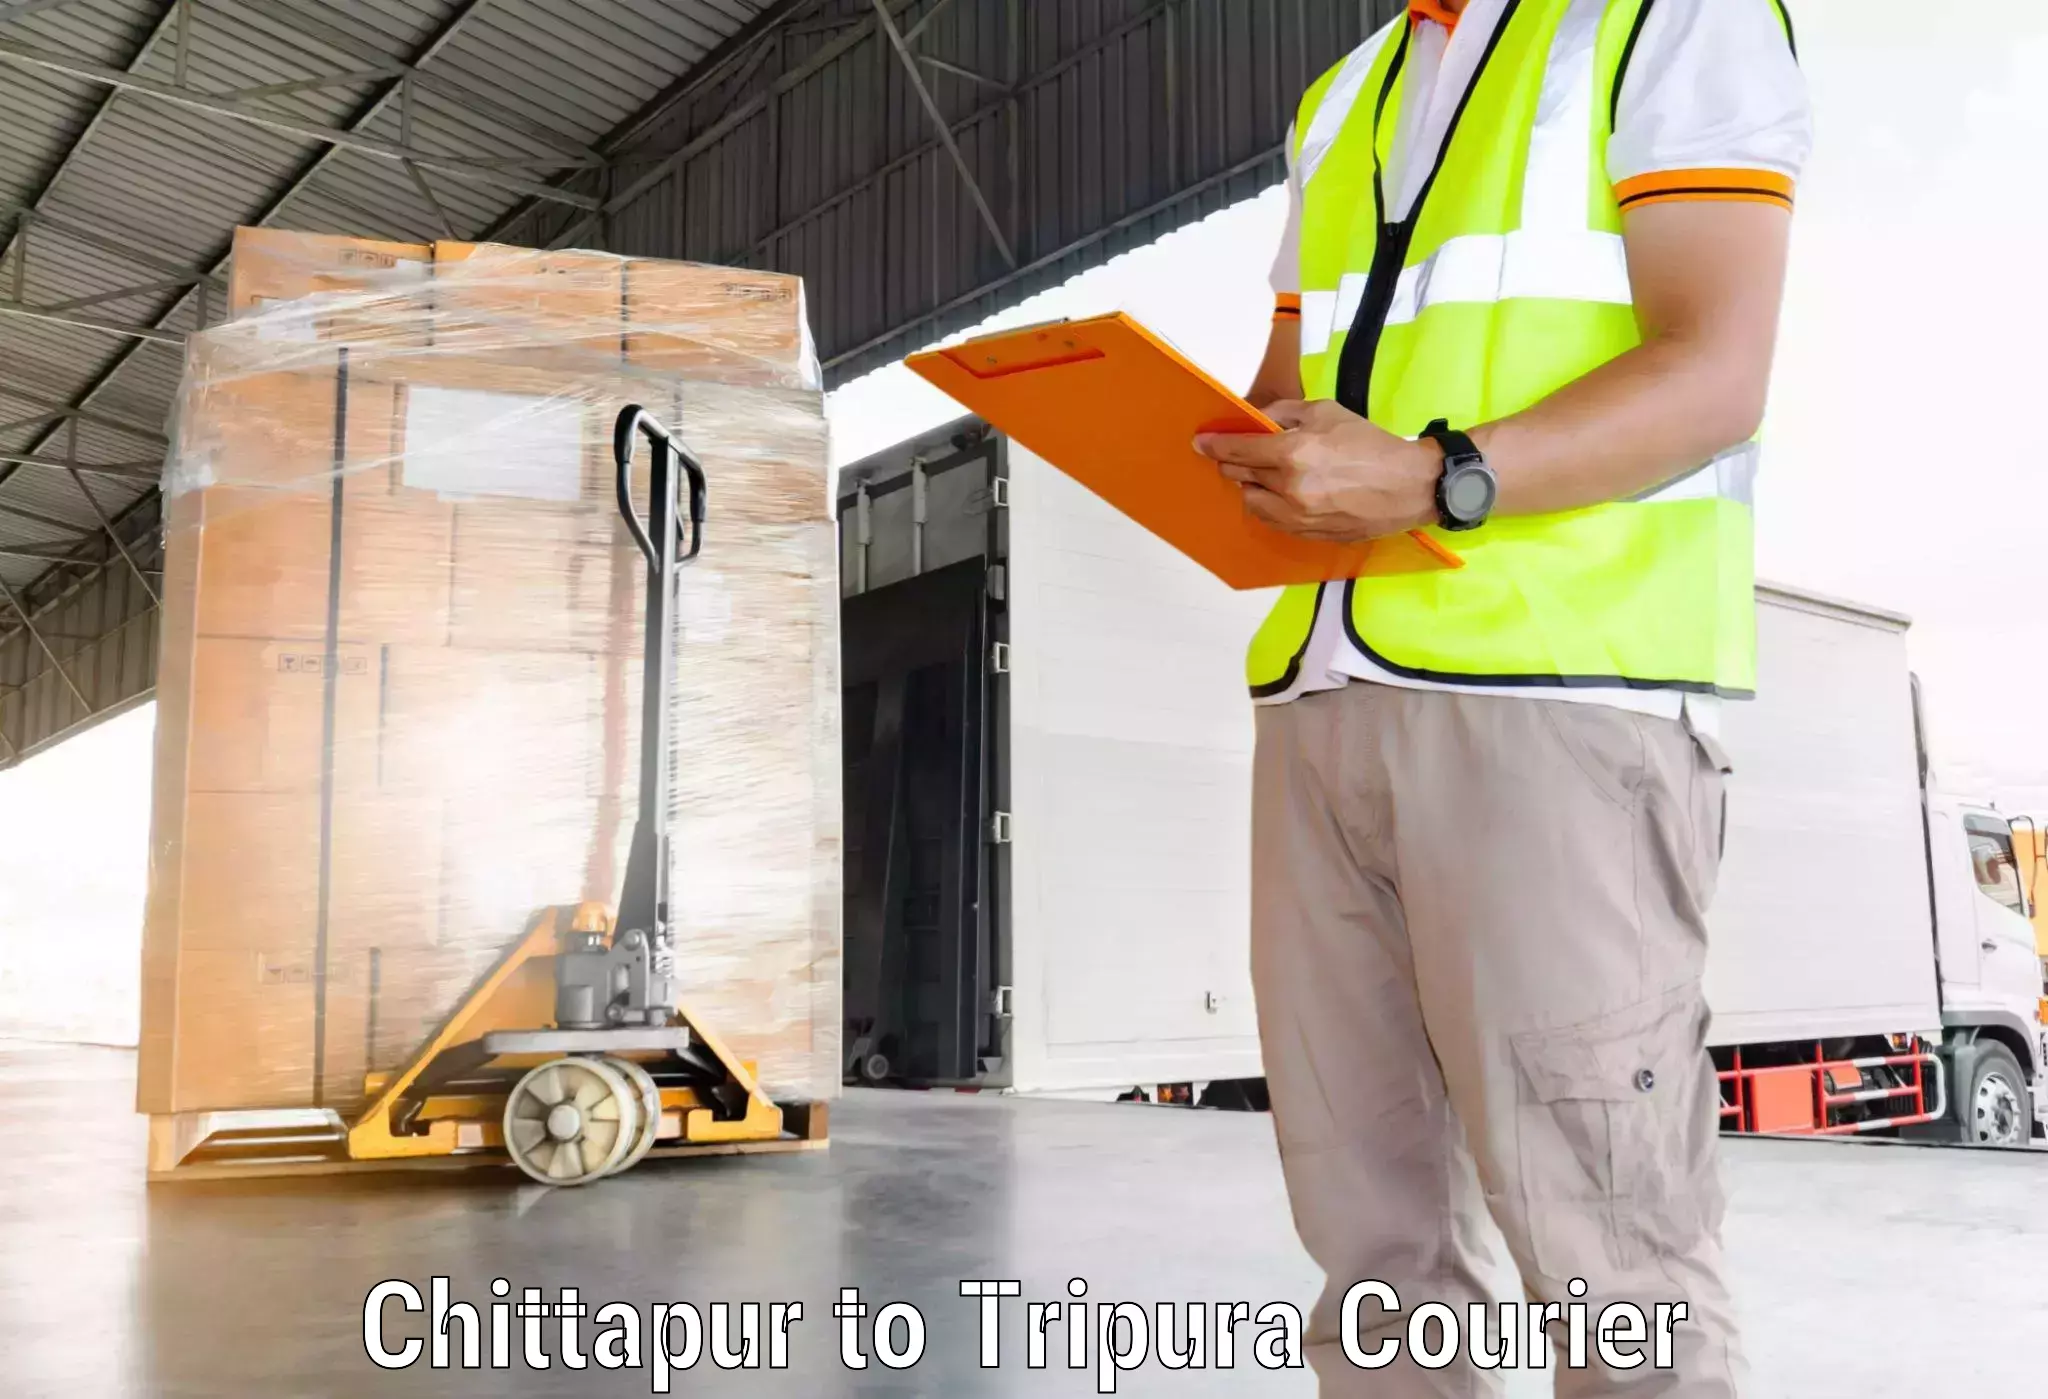 Reliable delivery network Chittapur to Udaipur Tripura